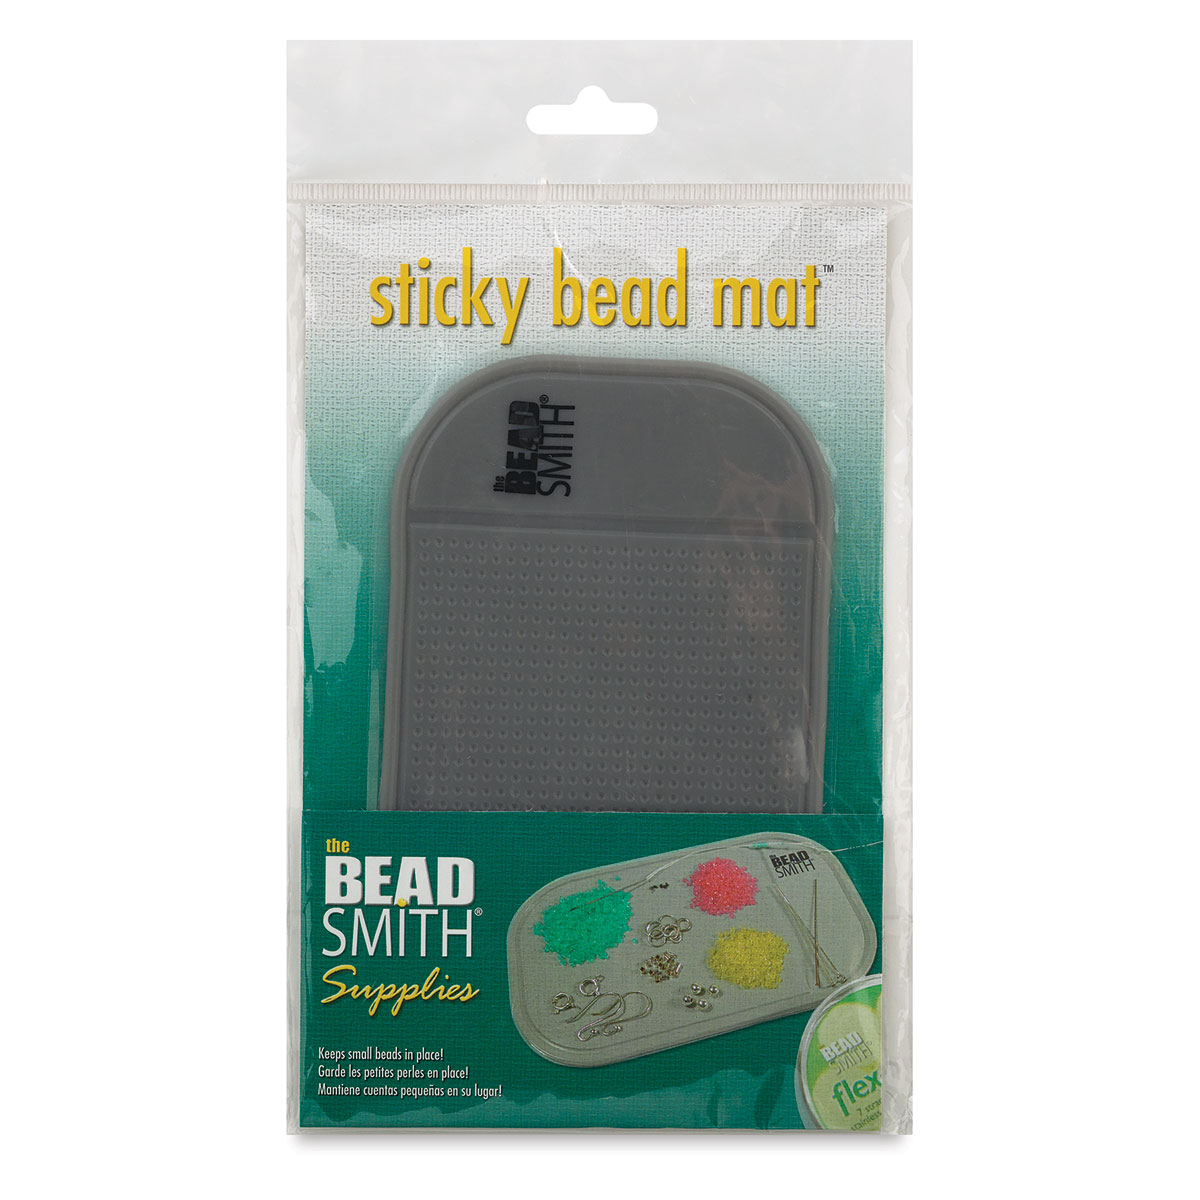 Beading Mats and Other Bead Surfaces